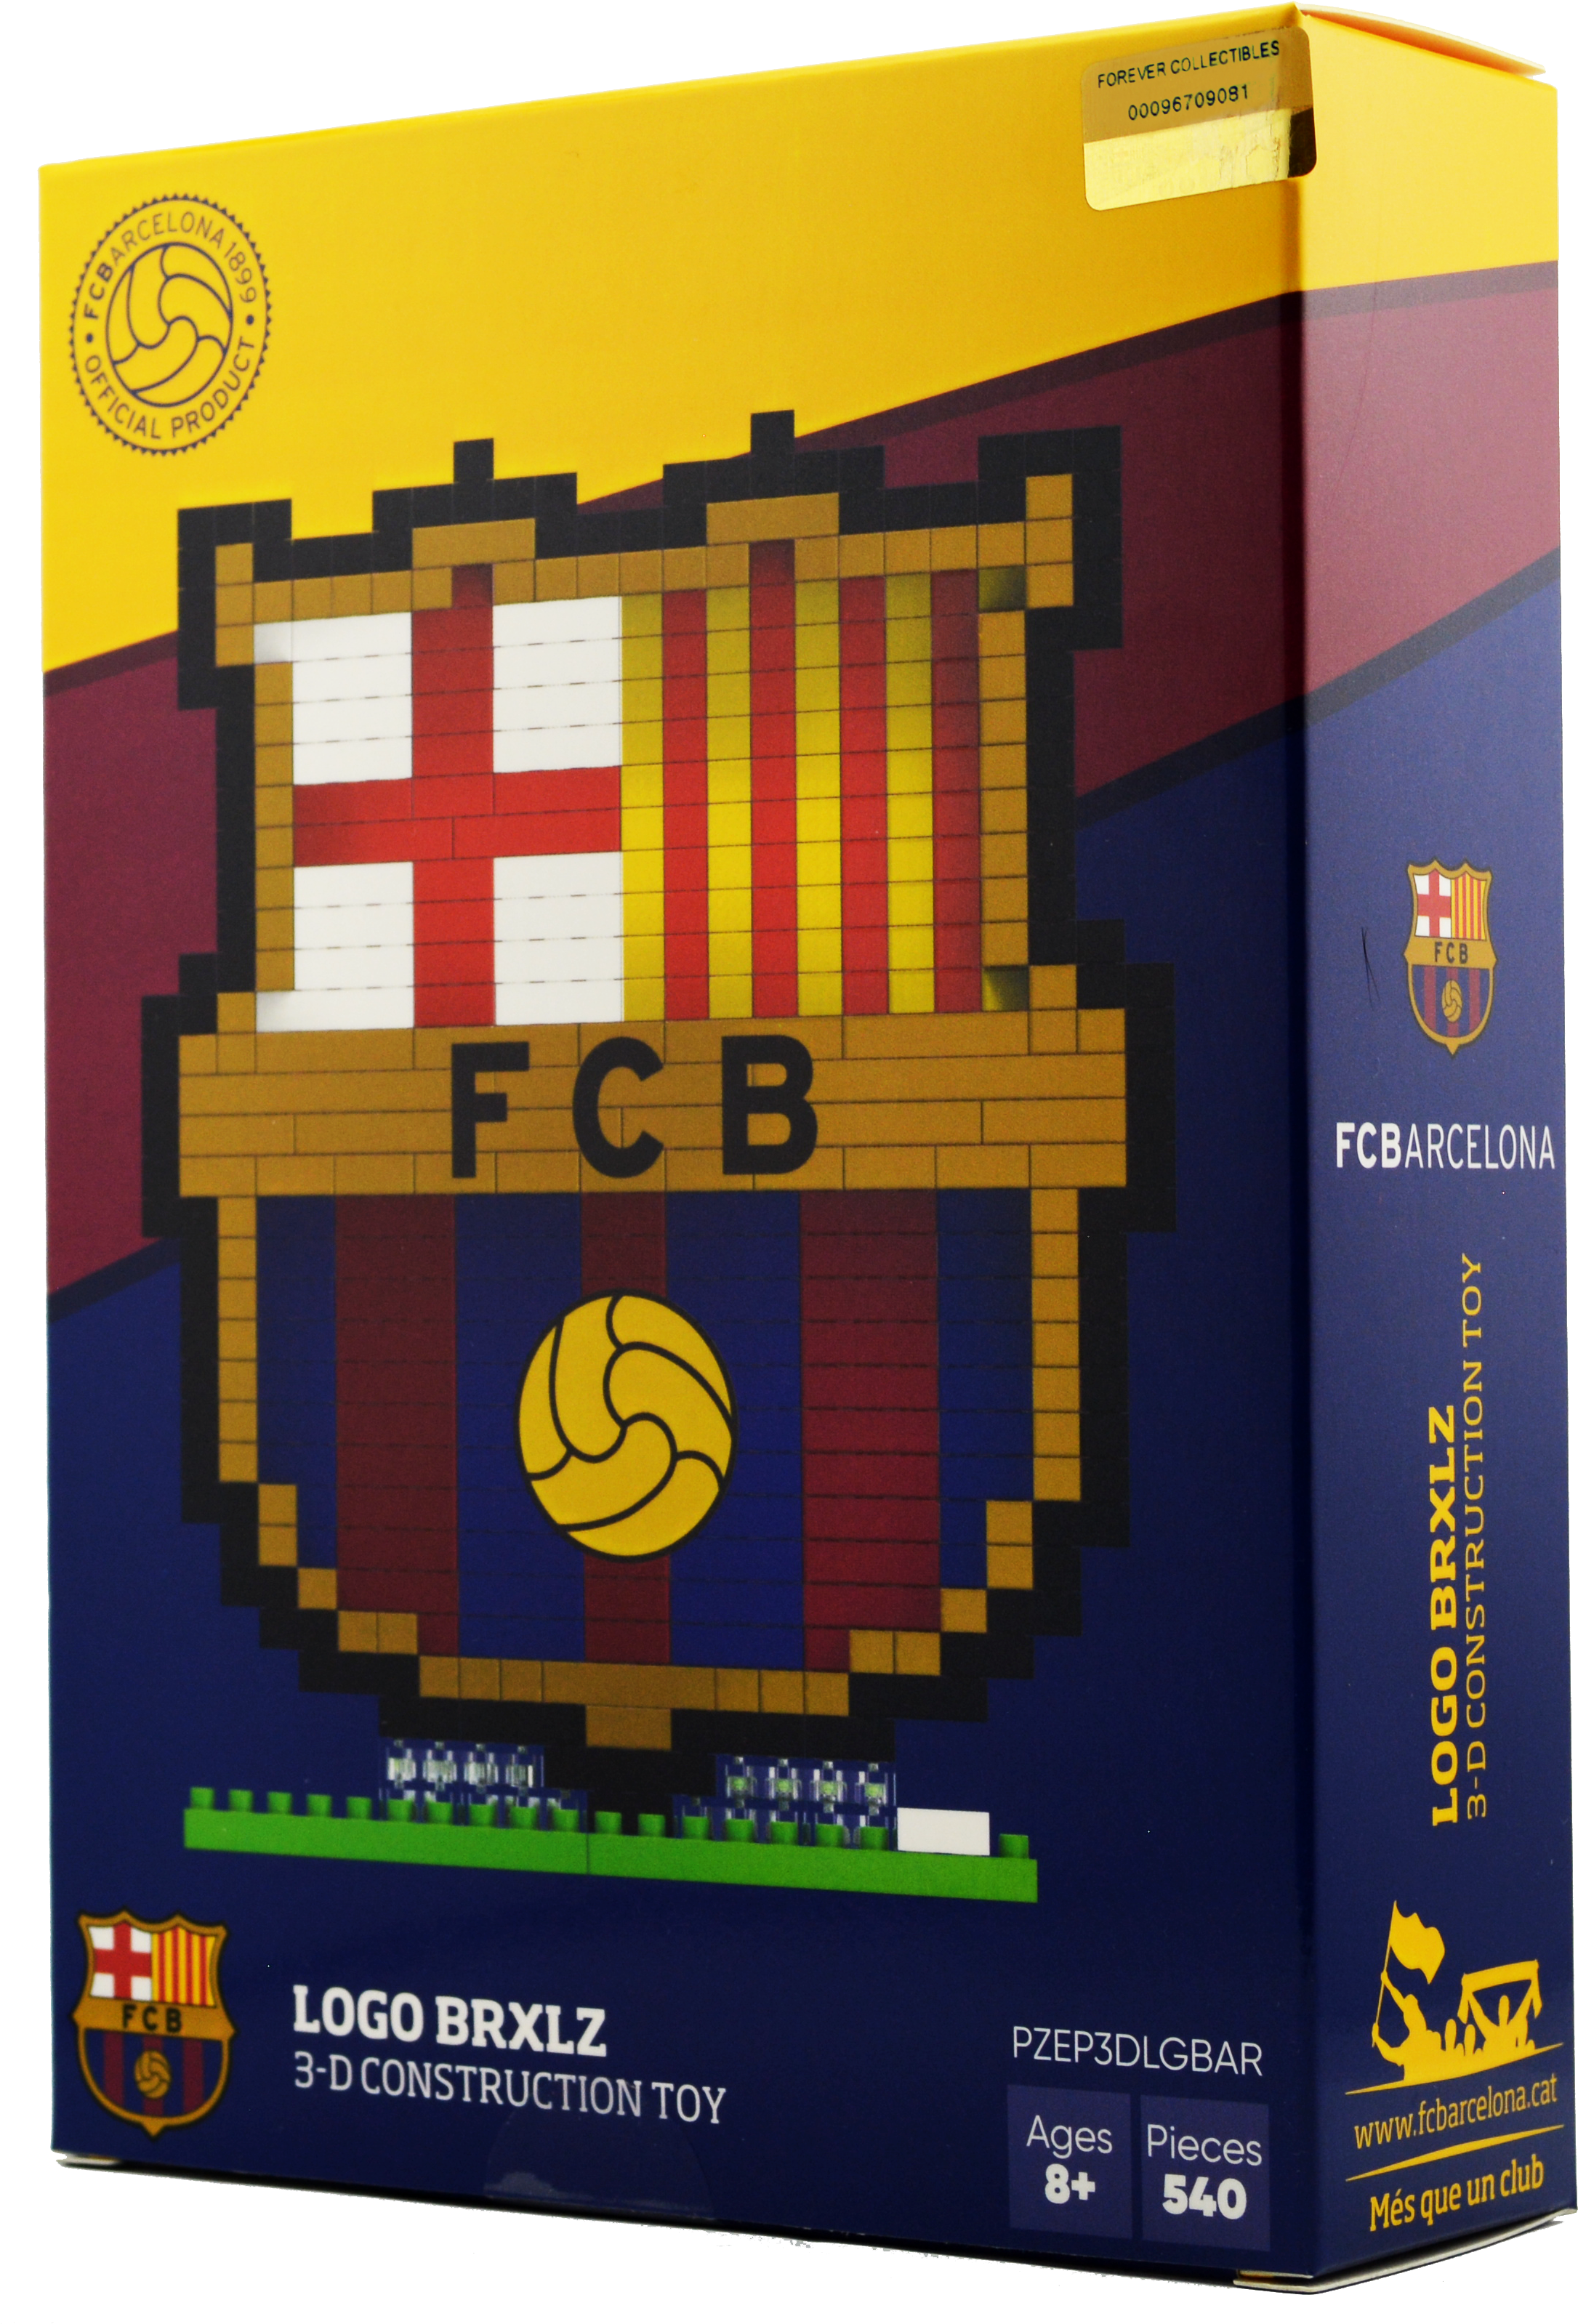 F C Barcelona3 D Construction Toy Box PNG